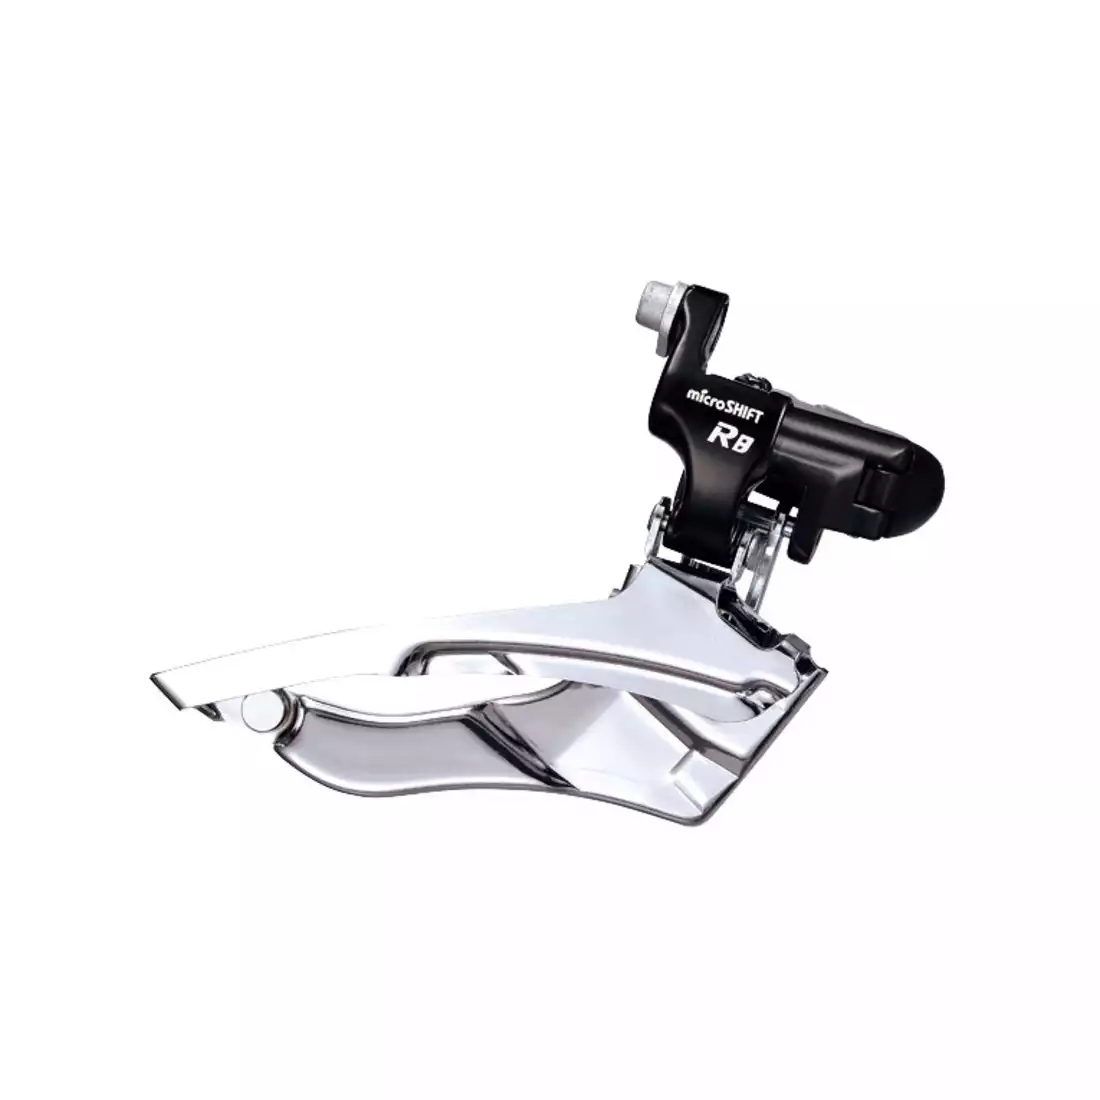 MICROSHIFT R8 8-speed front bicycle derailleur (3x8), silver